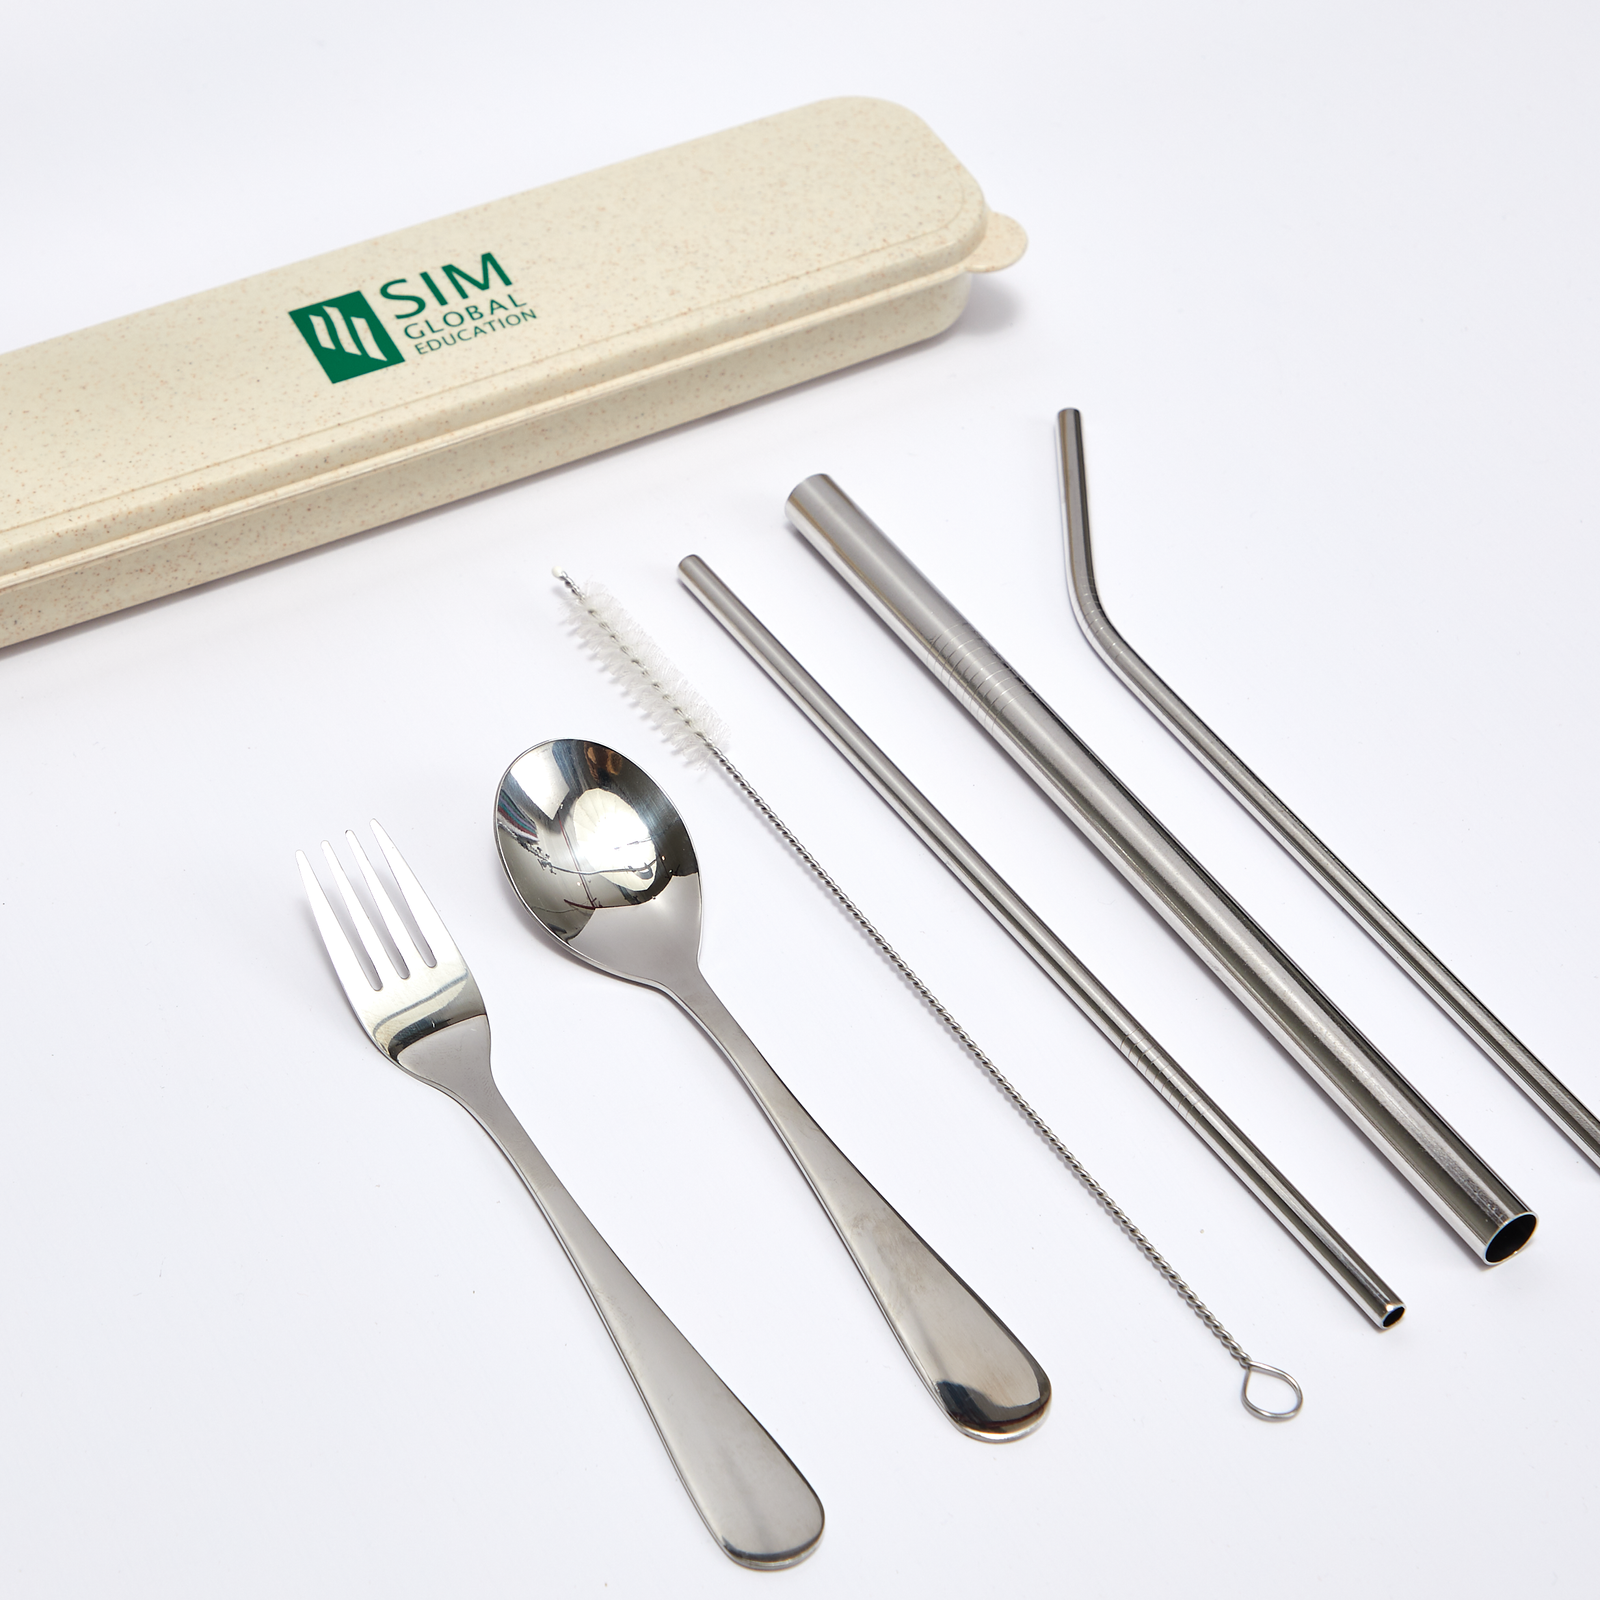 Cutlery set consisting of stainless steel fork